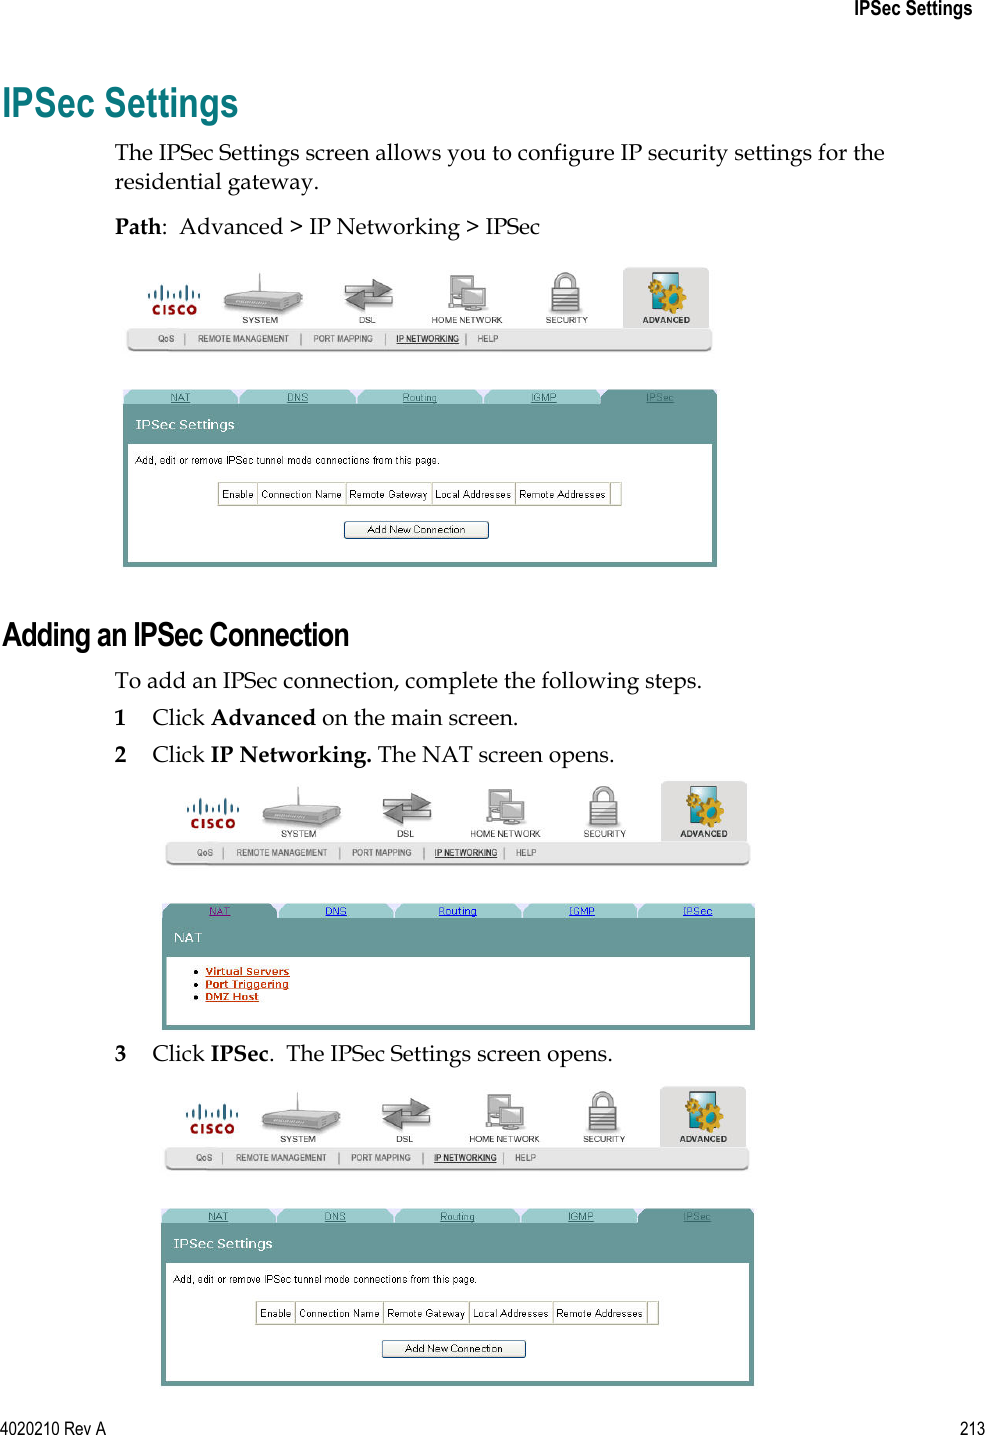   IPSec Settings 4020210 Rev A 213  IPSec Settings The IPSec Settings screen allows you to configure IP security settings for the residential gateway. Path:  Advanced &gt; IP Networking &gt; IPSec   Adding an IPSec Connection To add an IPSec connection, complete the following steps. 1 Click Advanced on the main screen.  2 Click IP Networking. The NAT screen opens.  3 Click IPSec.  The IPSec Settings screen opens.  